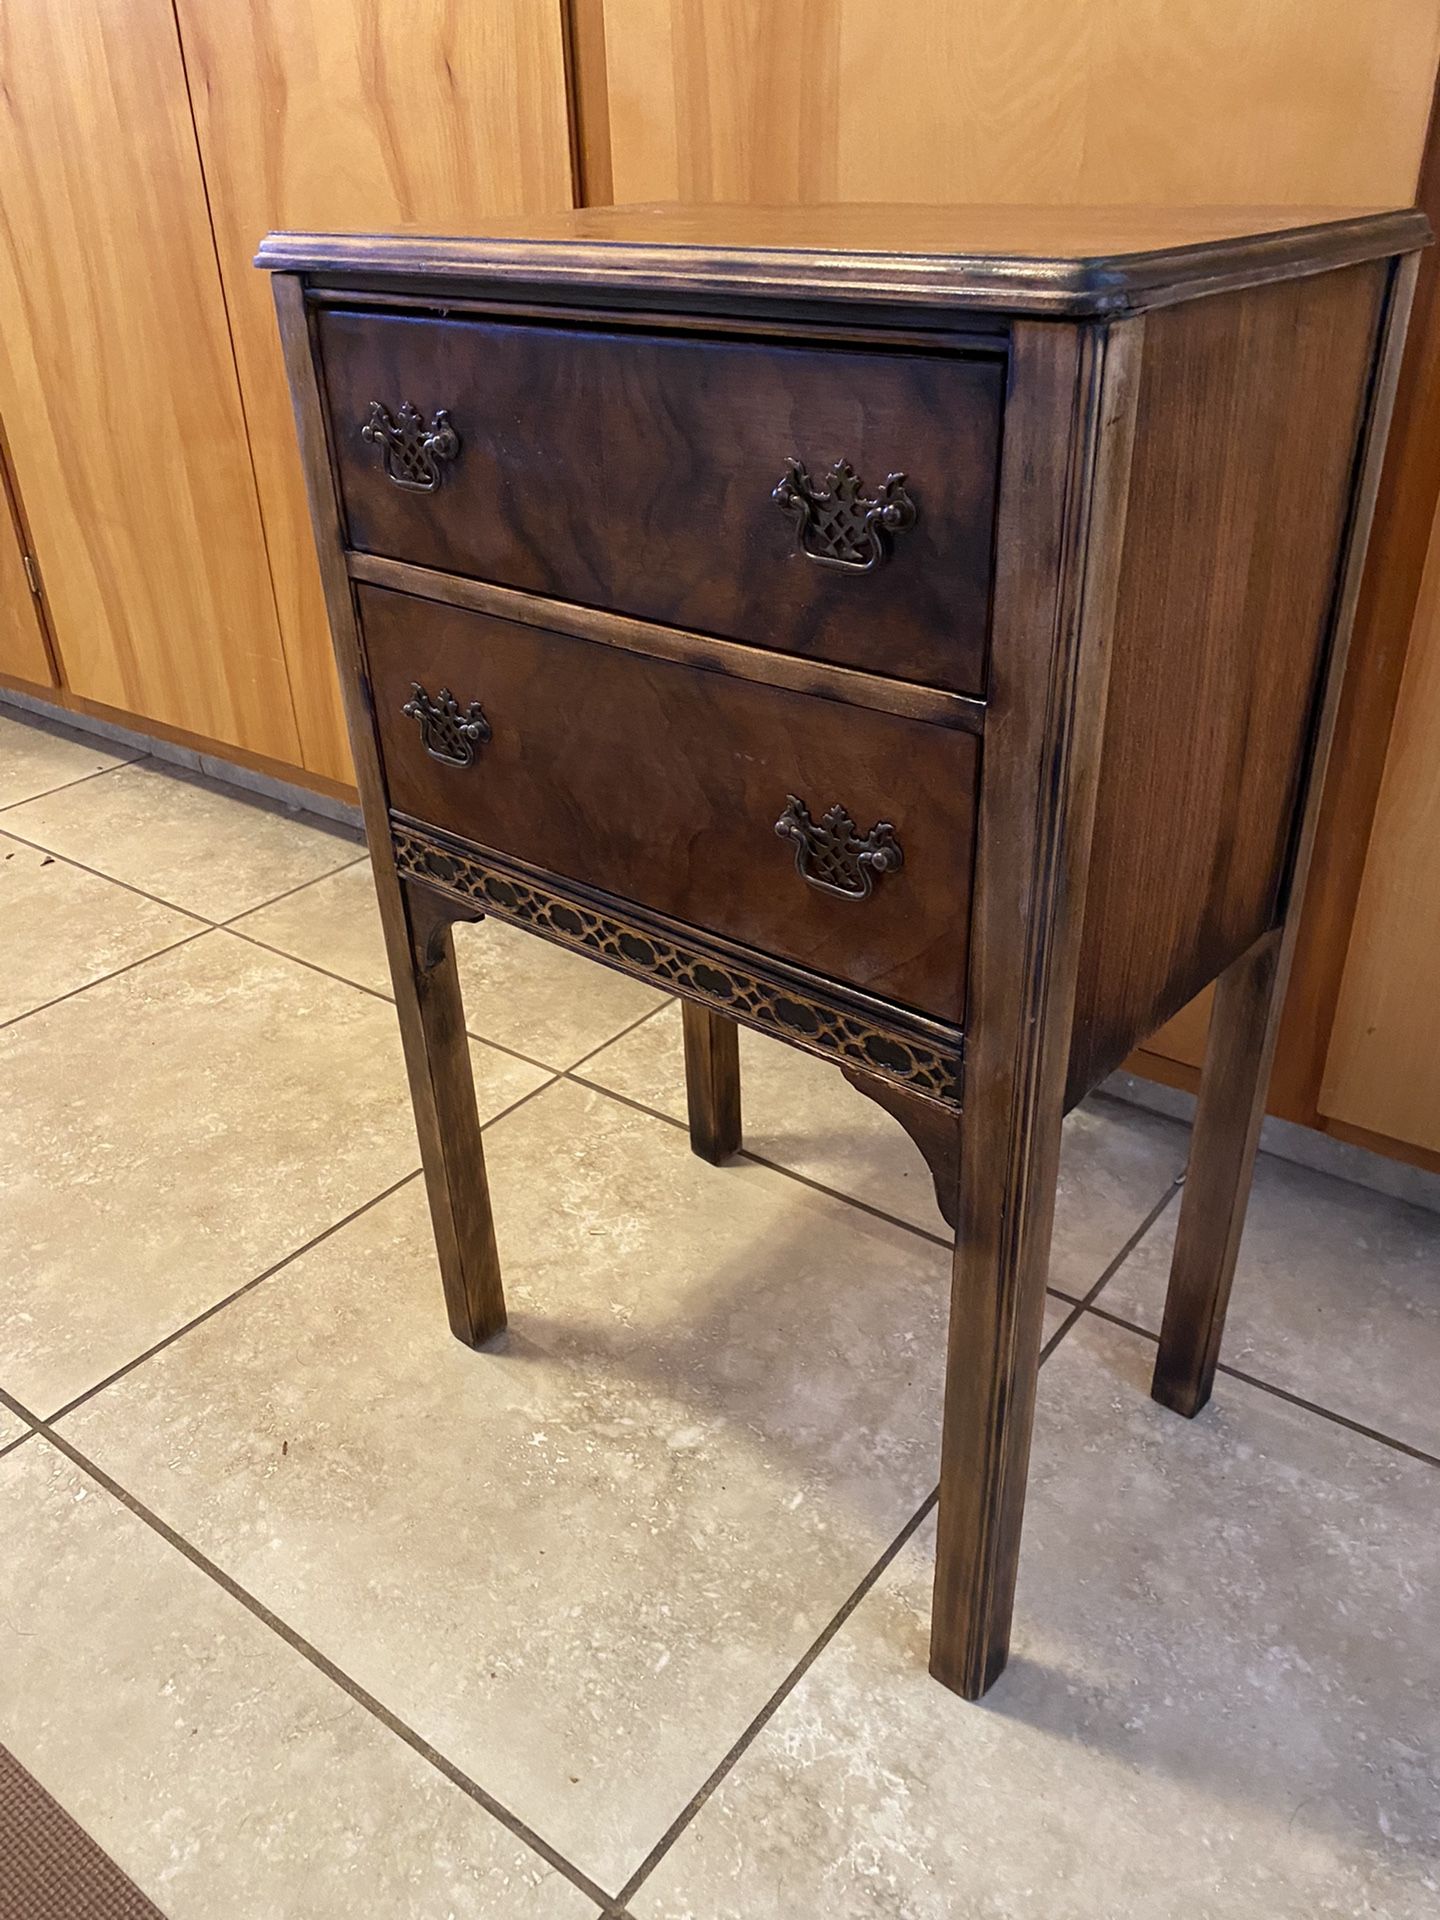 Refurbished Old Sewing Side Table With Storage